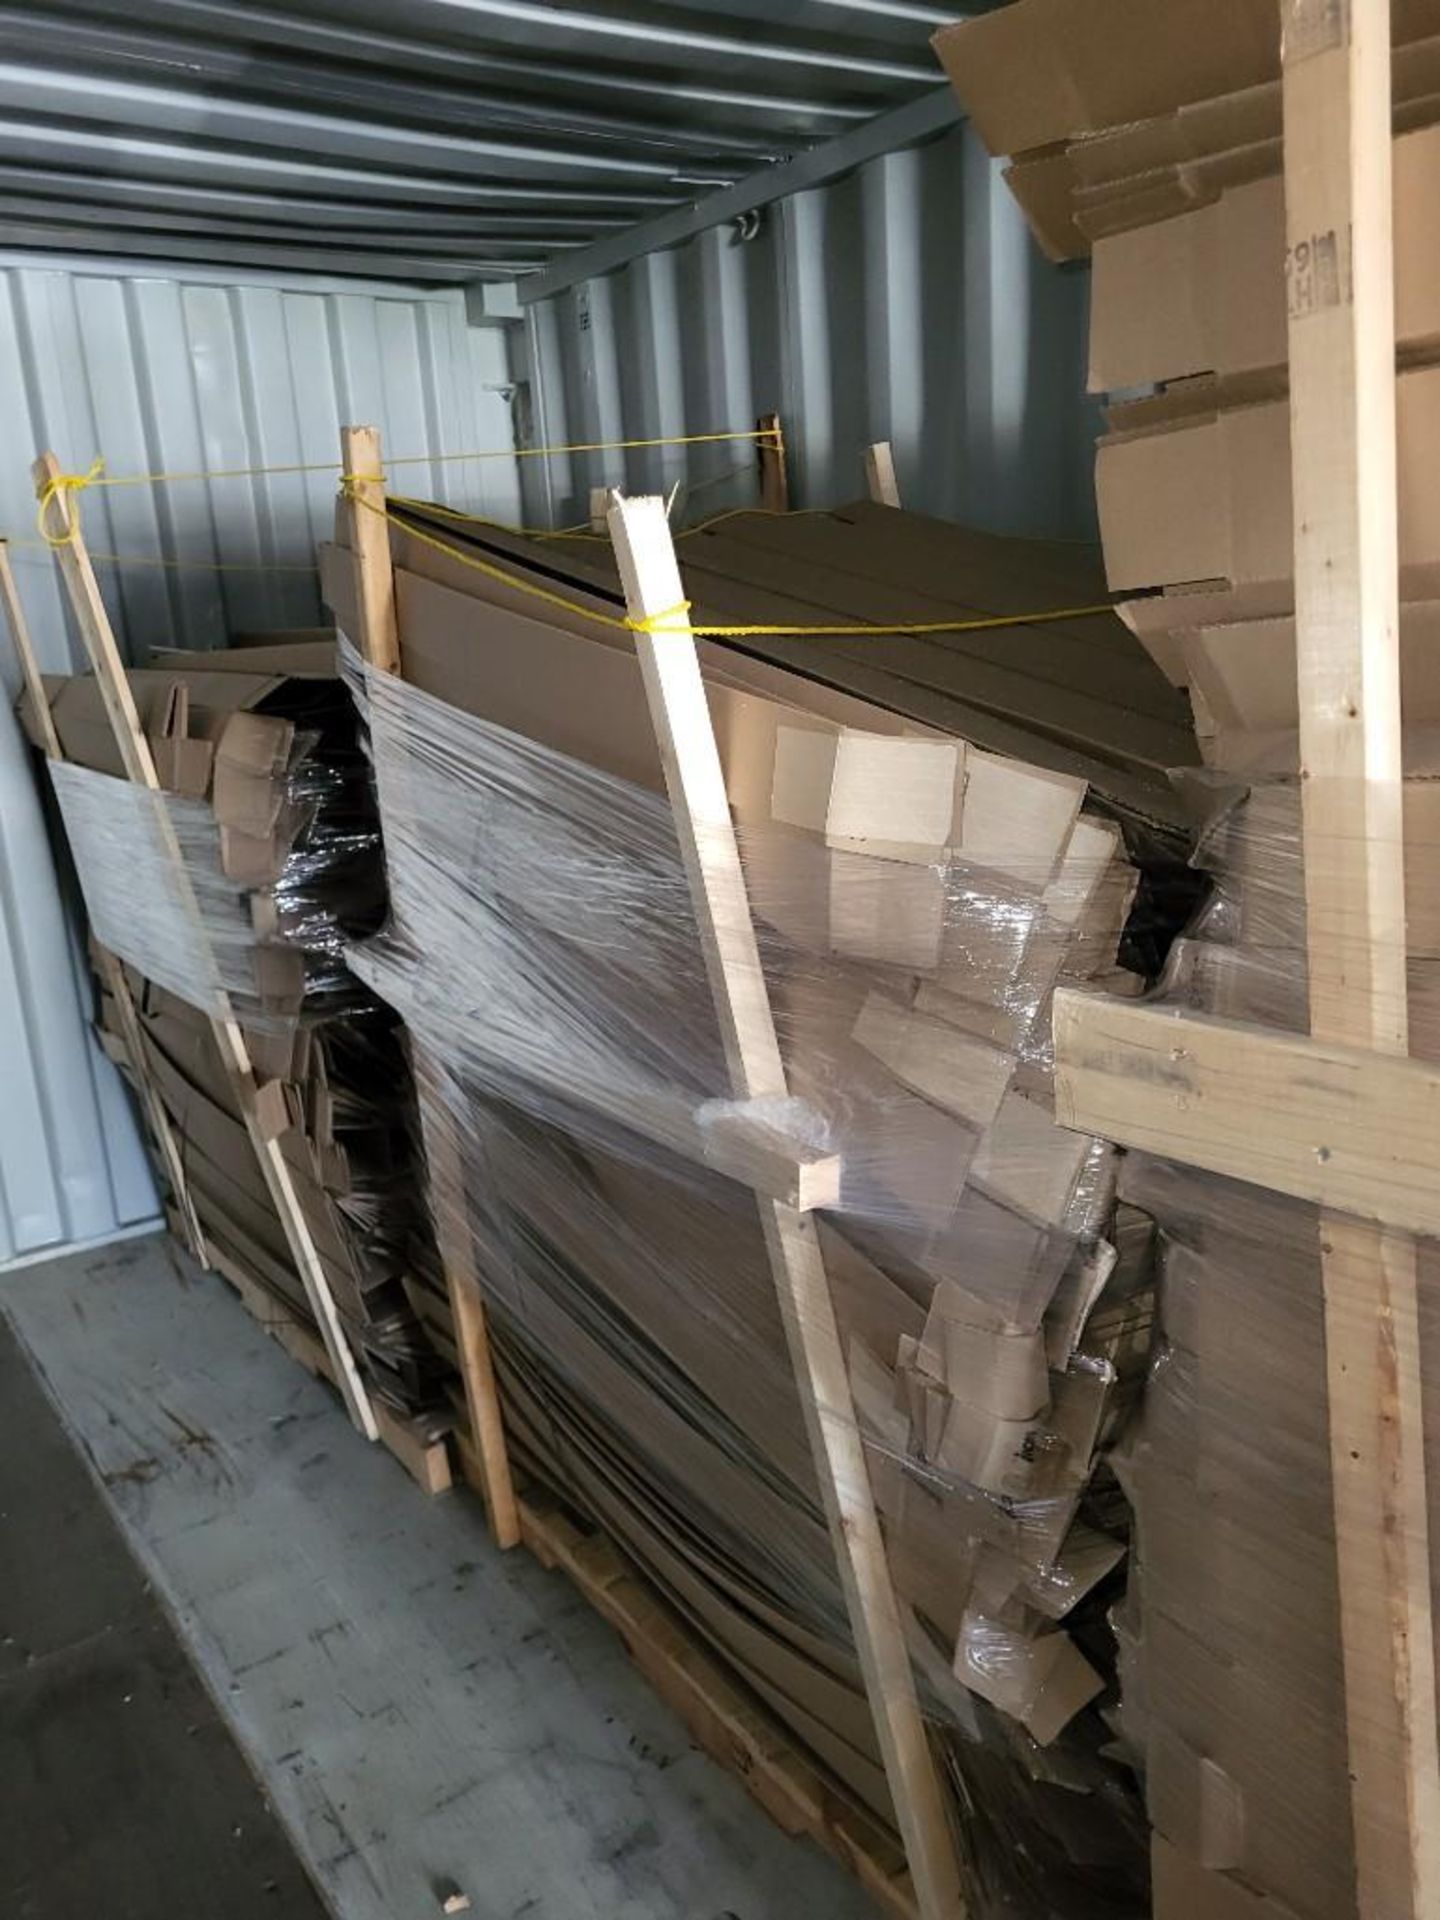 SHIPPING SUPPLIES - LONG CARDBOARD BOXES - Image 2 of 7